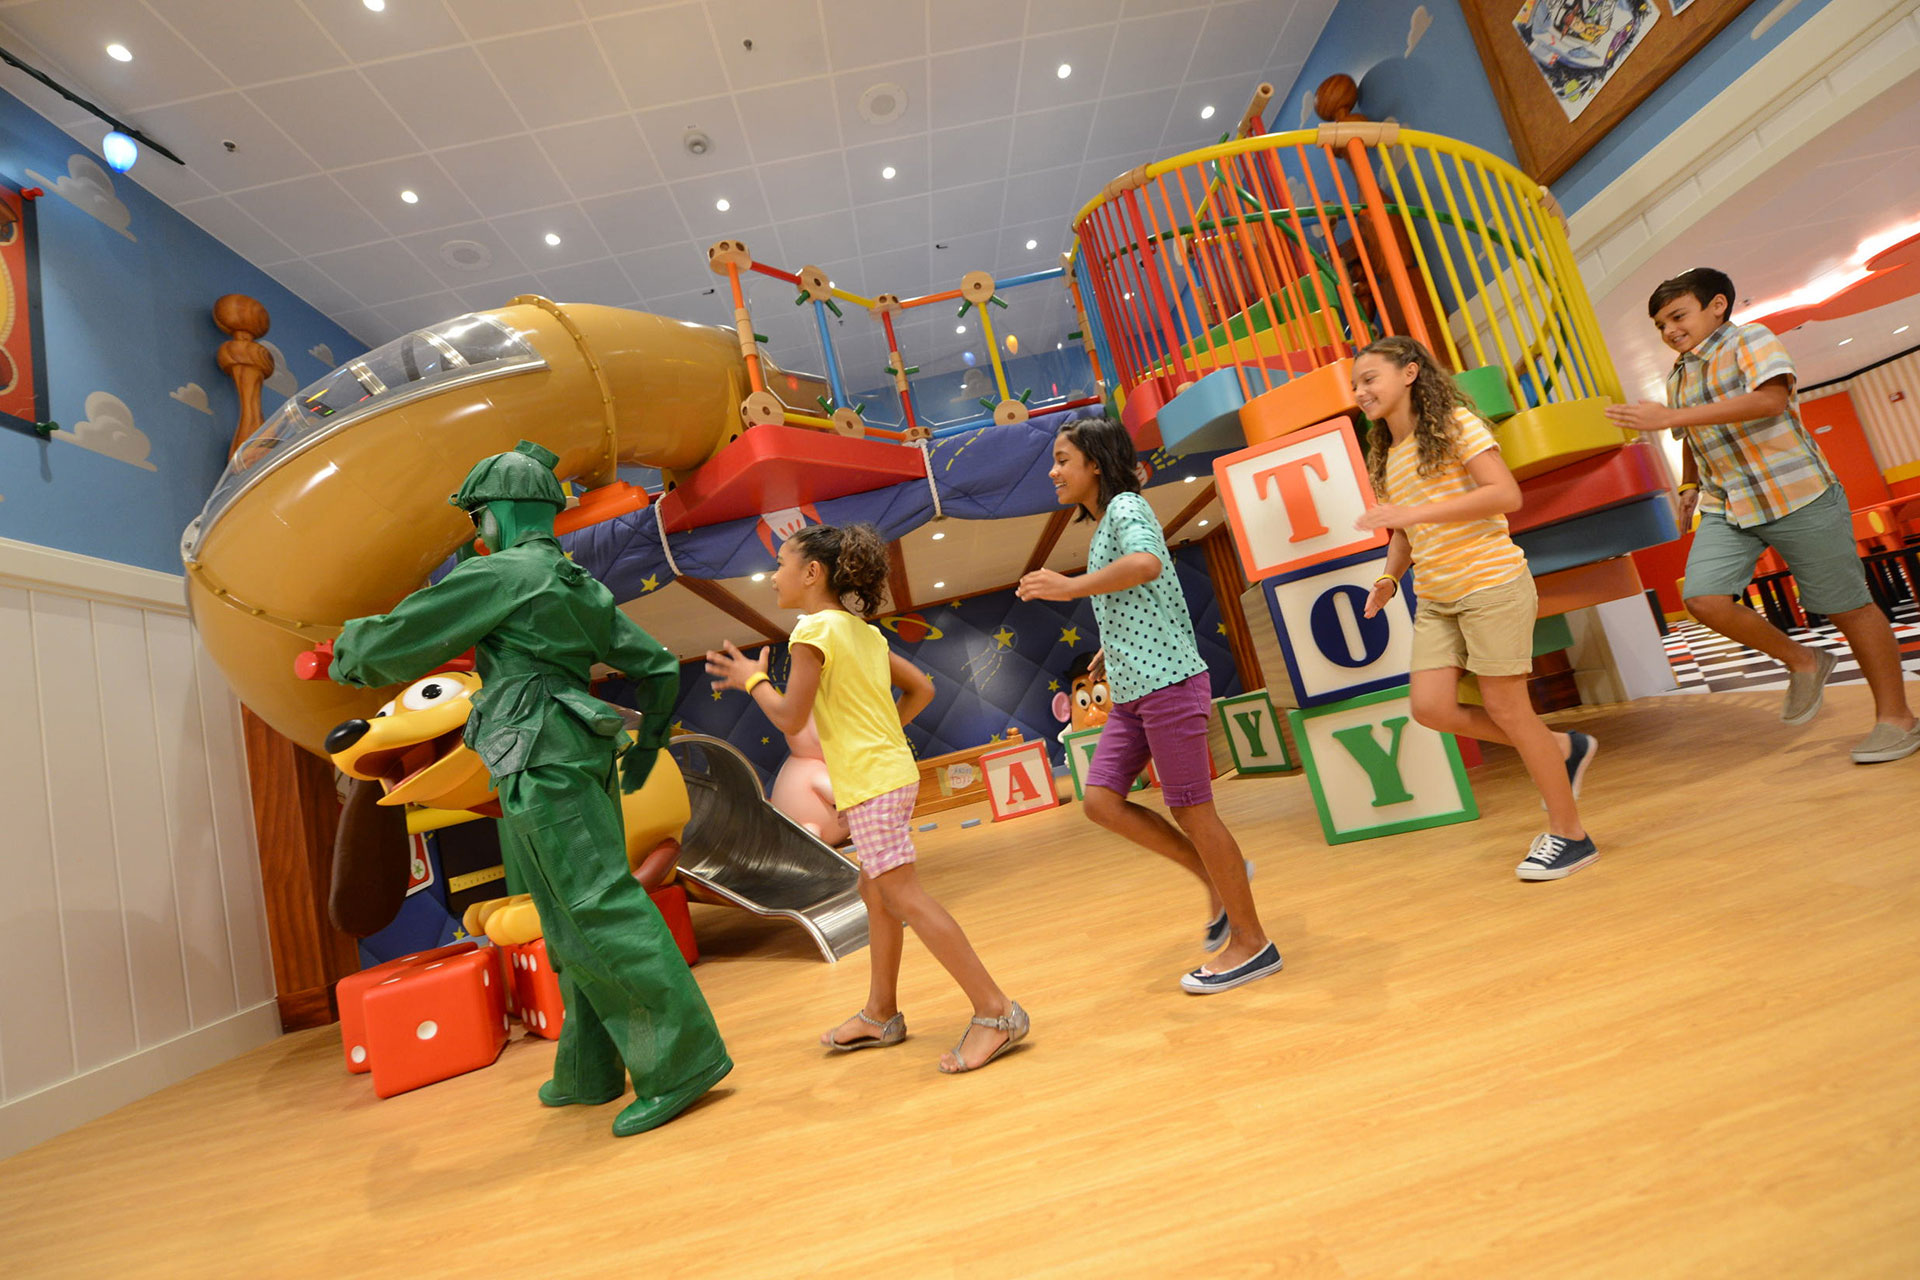 Andy's Toy Room at Kids' Club on Disney Cruise Line; Courtesy of Disney